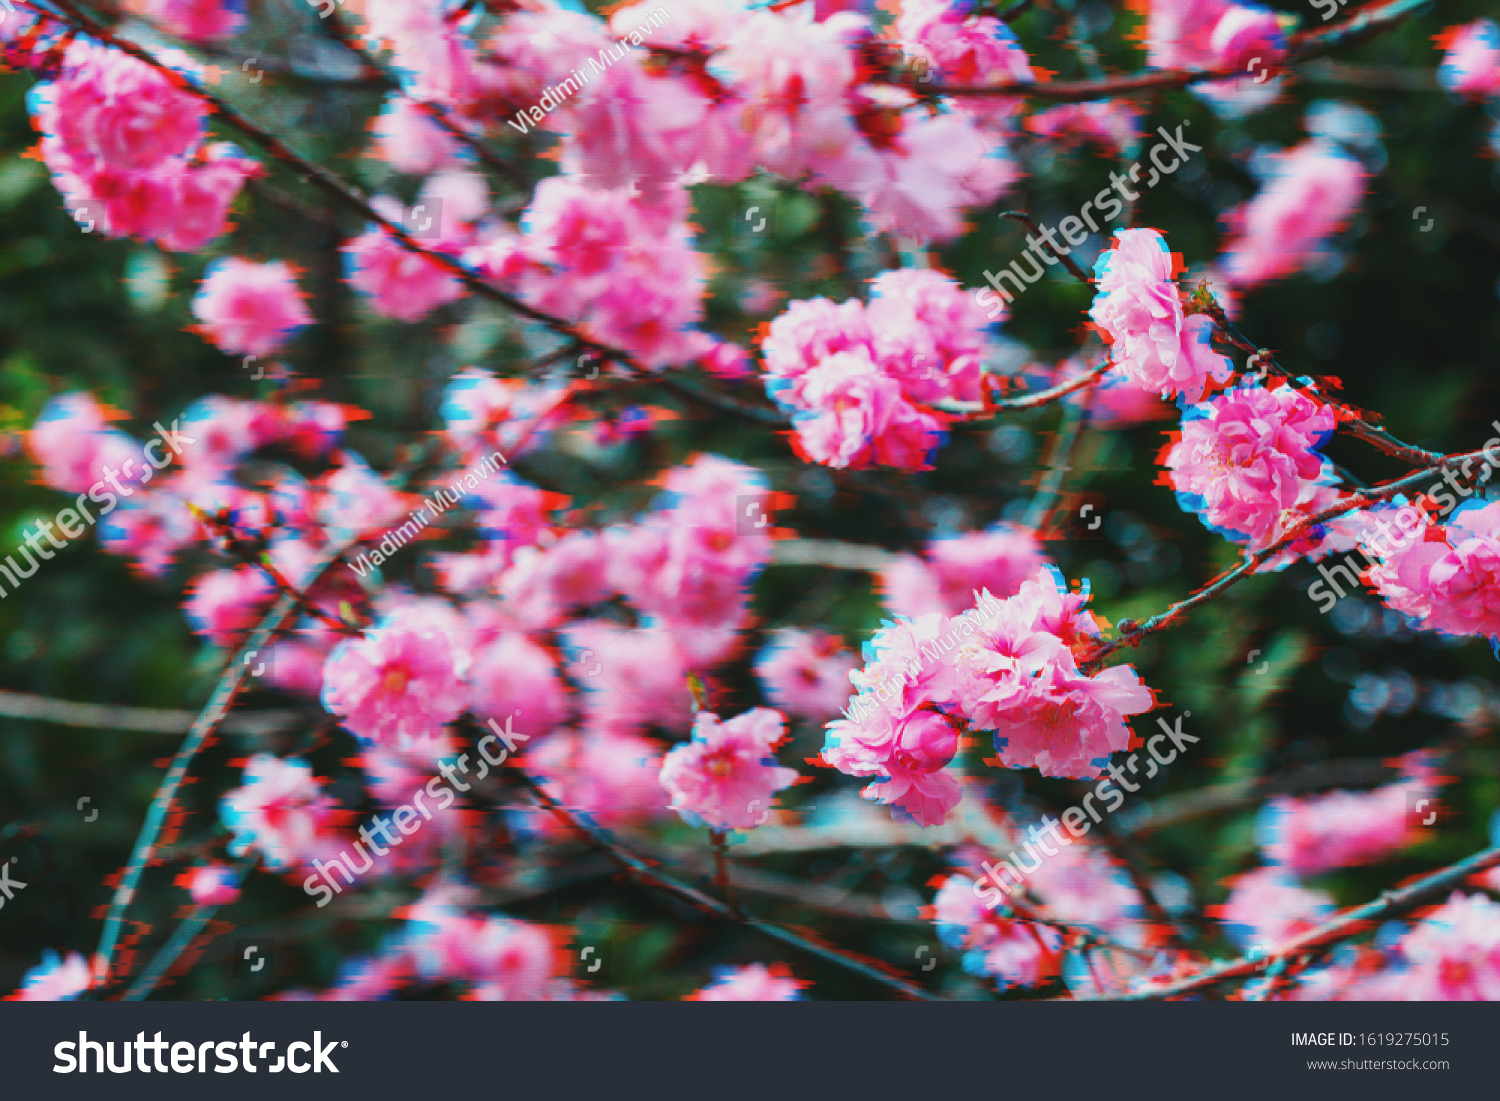 Pink blossoms of cherry blossoms in the garden in glitch effect #1619275015